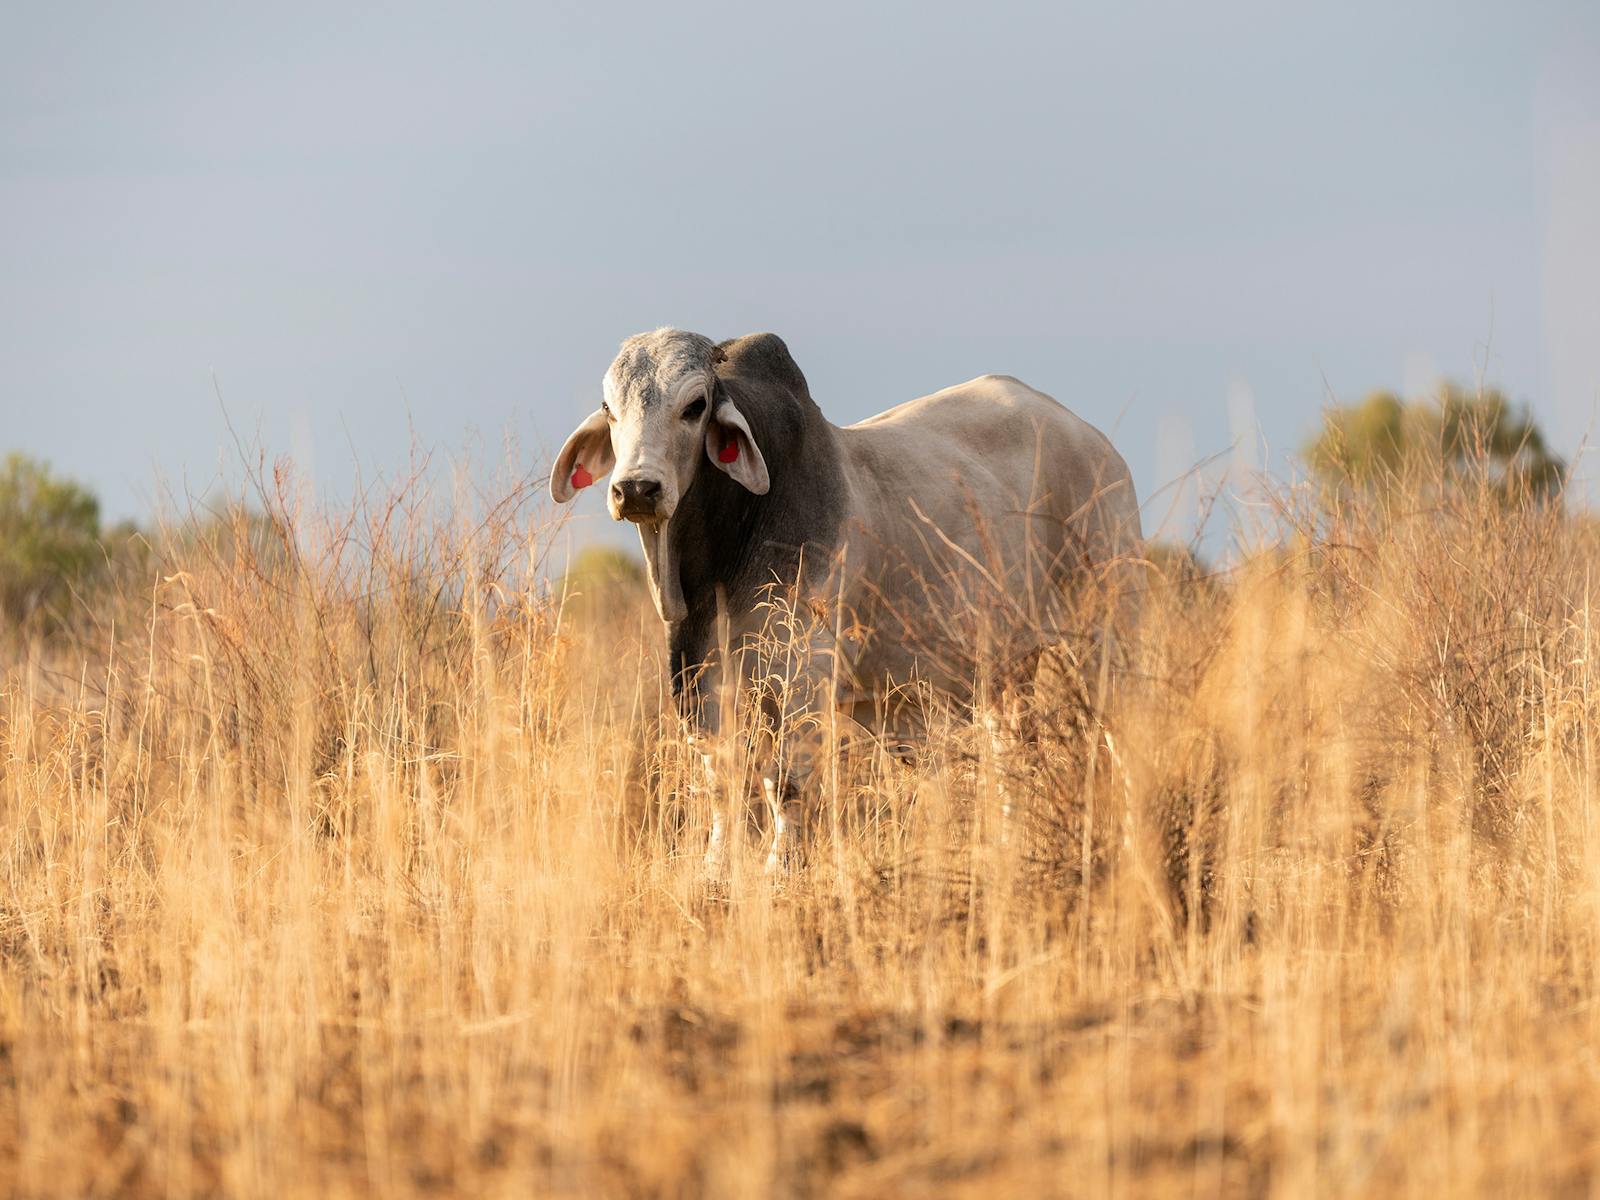 Brahman cattle in the outback